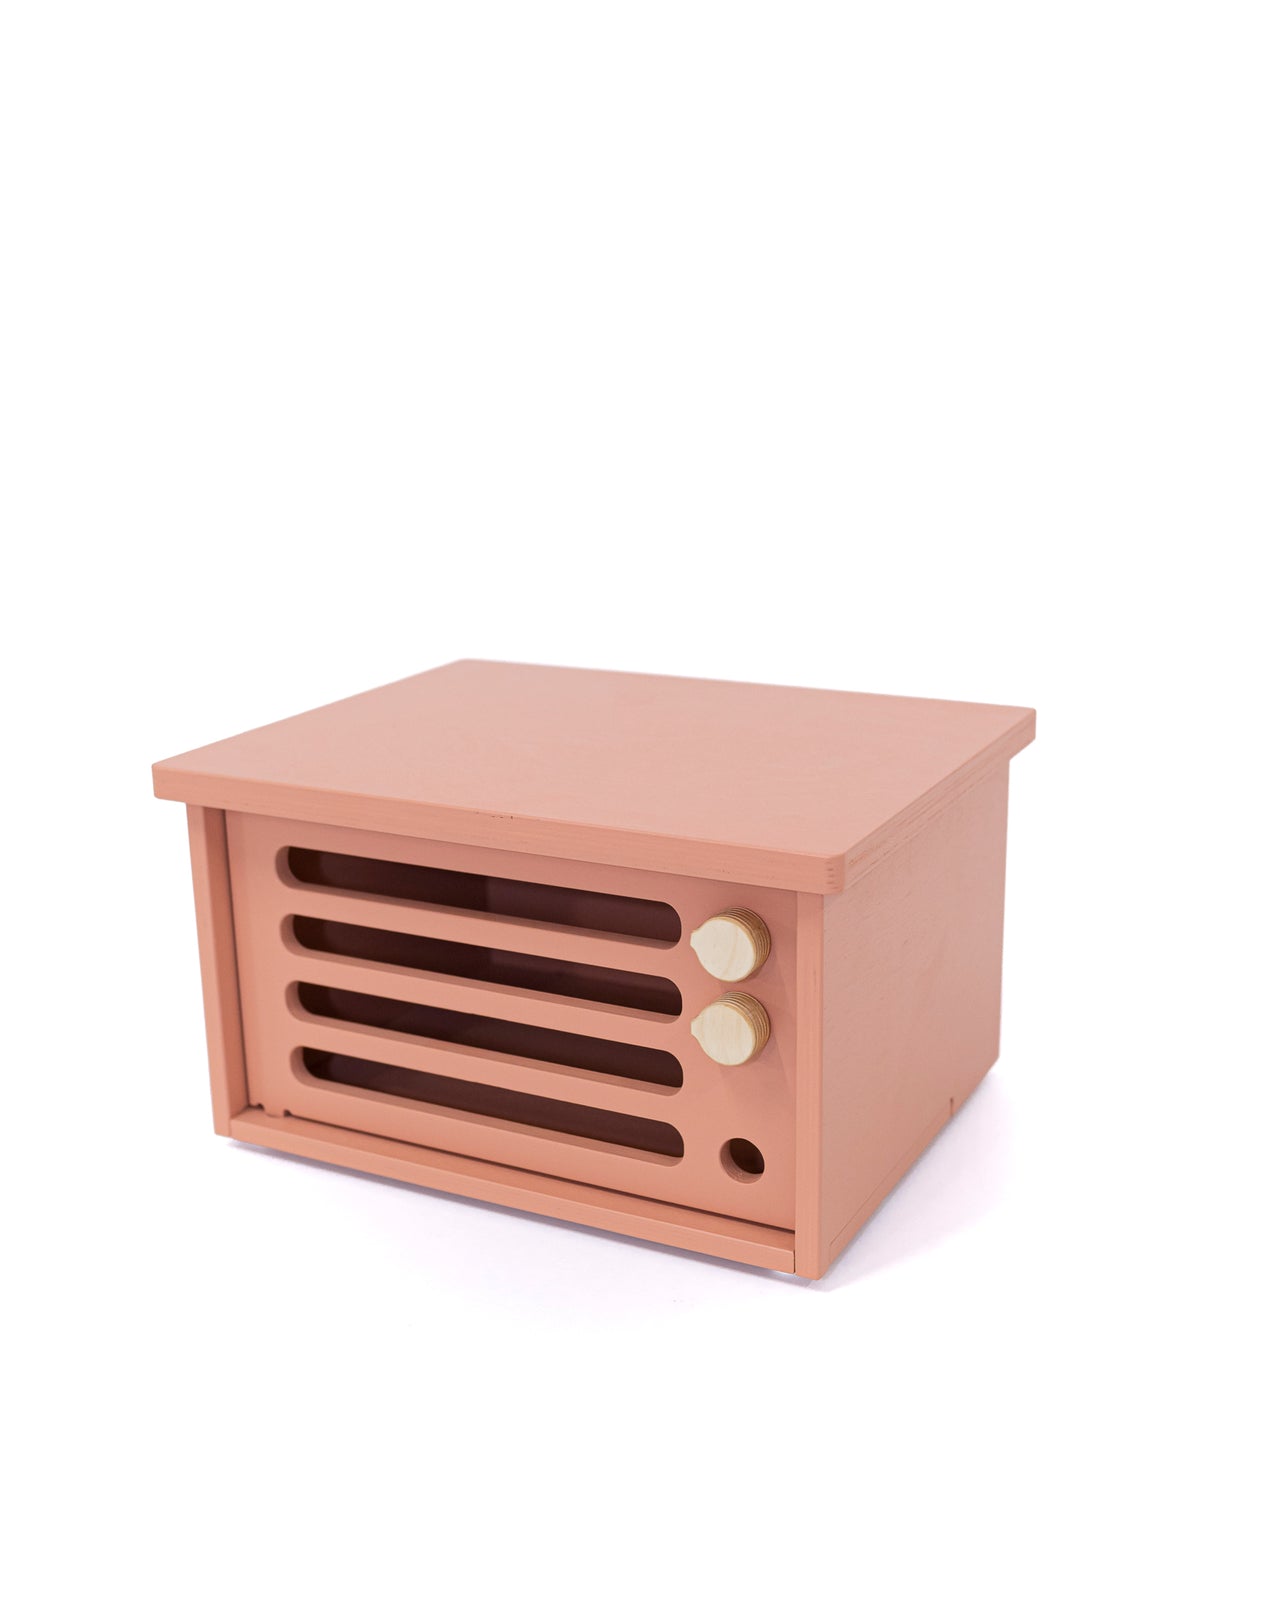 Play Oven - Dusty Pink - MIDMINI - Handcrafted wooden toys for generations.